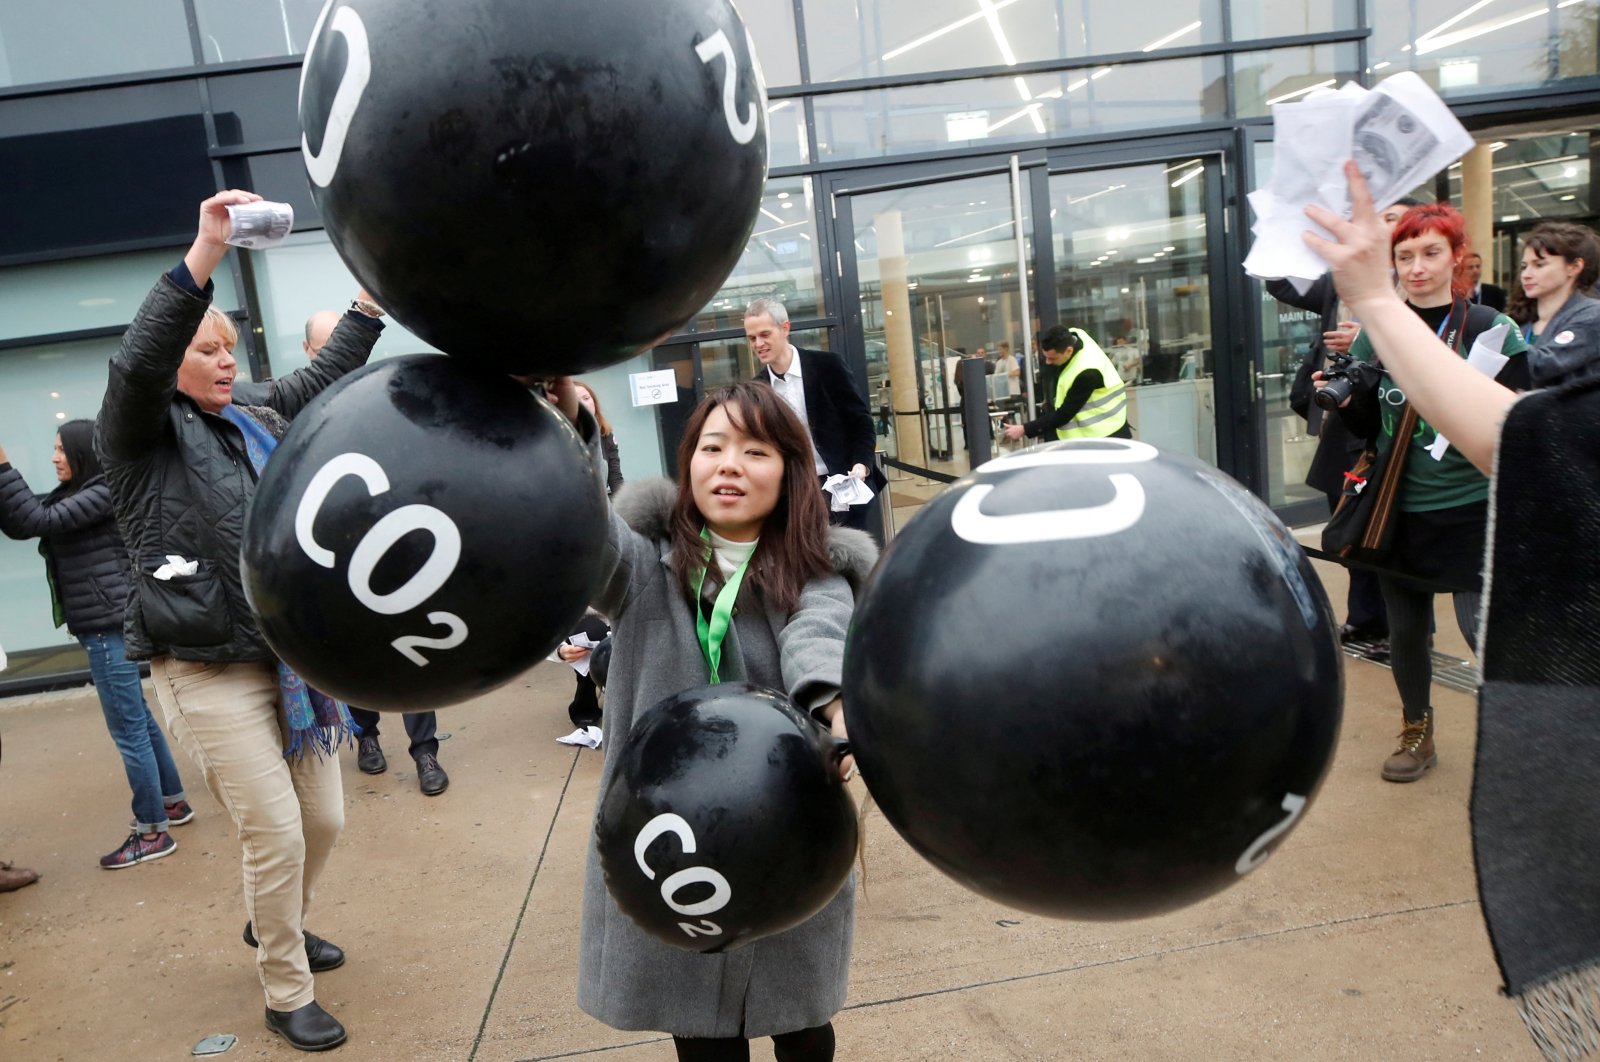 Activists protest carbon dioxide emissions trading in front of the World Congress Center Bonn, in Bonn, Germany, Nov. 17, 2017. (Reuters Photo)